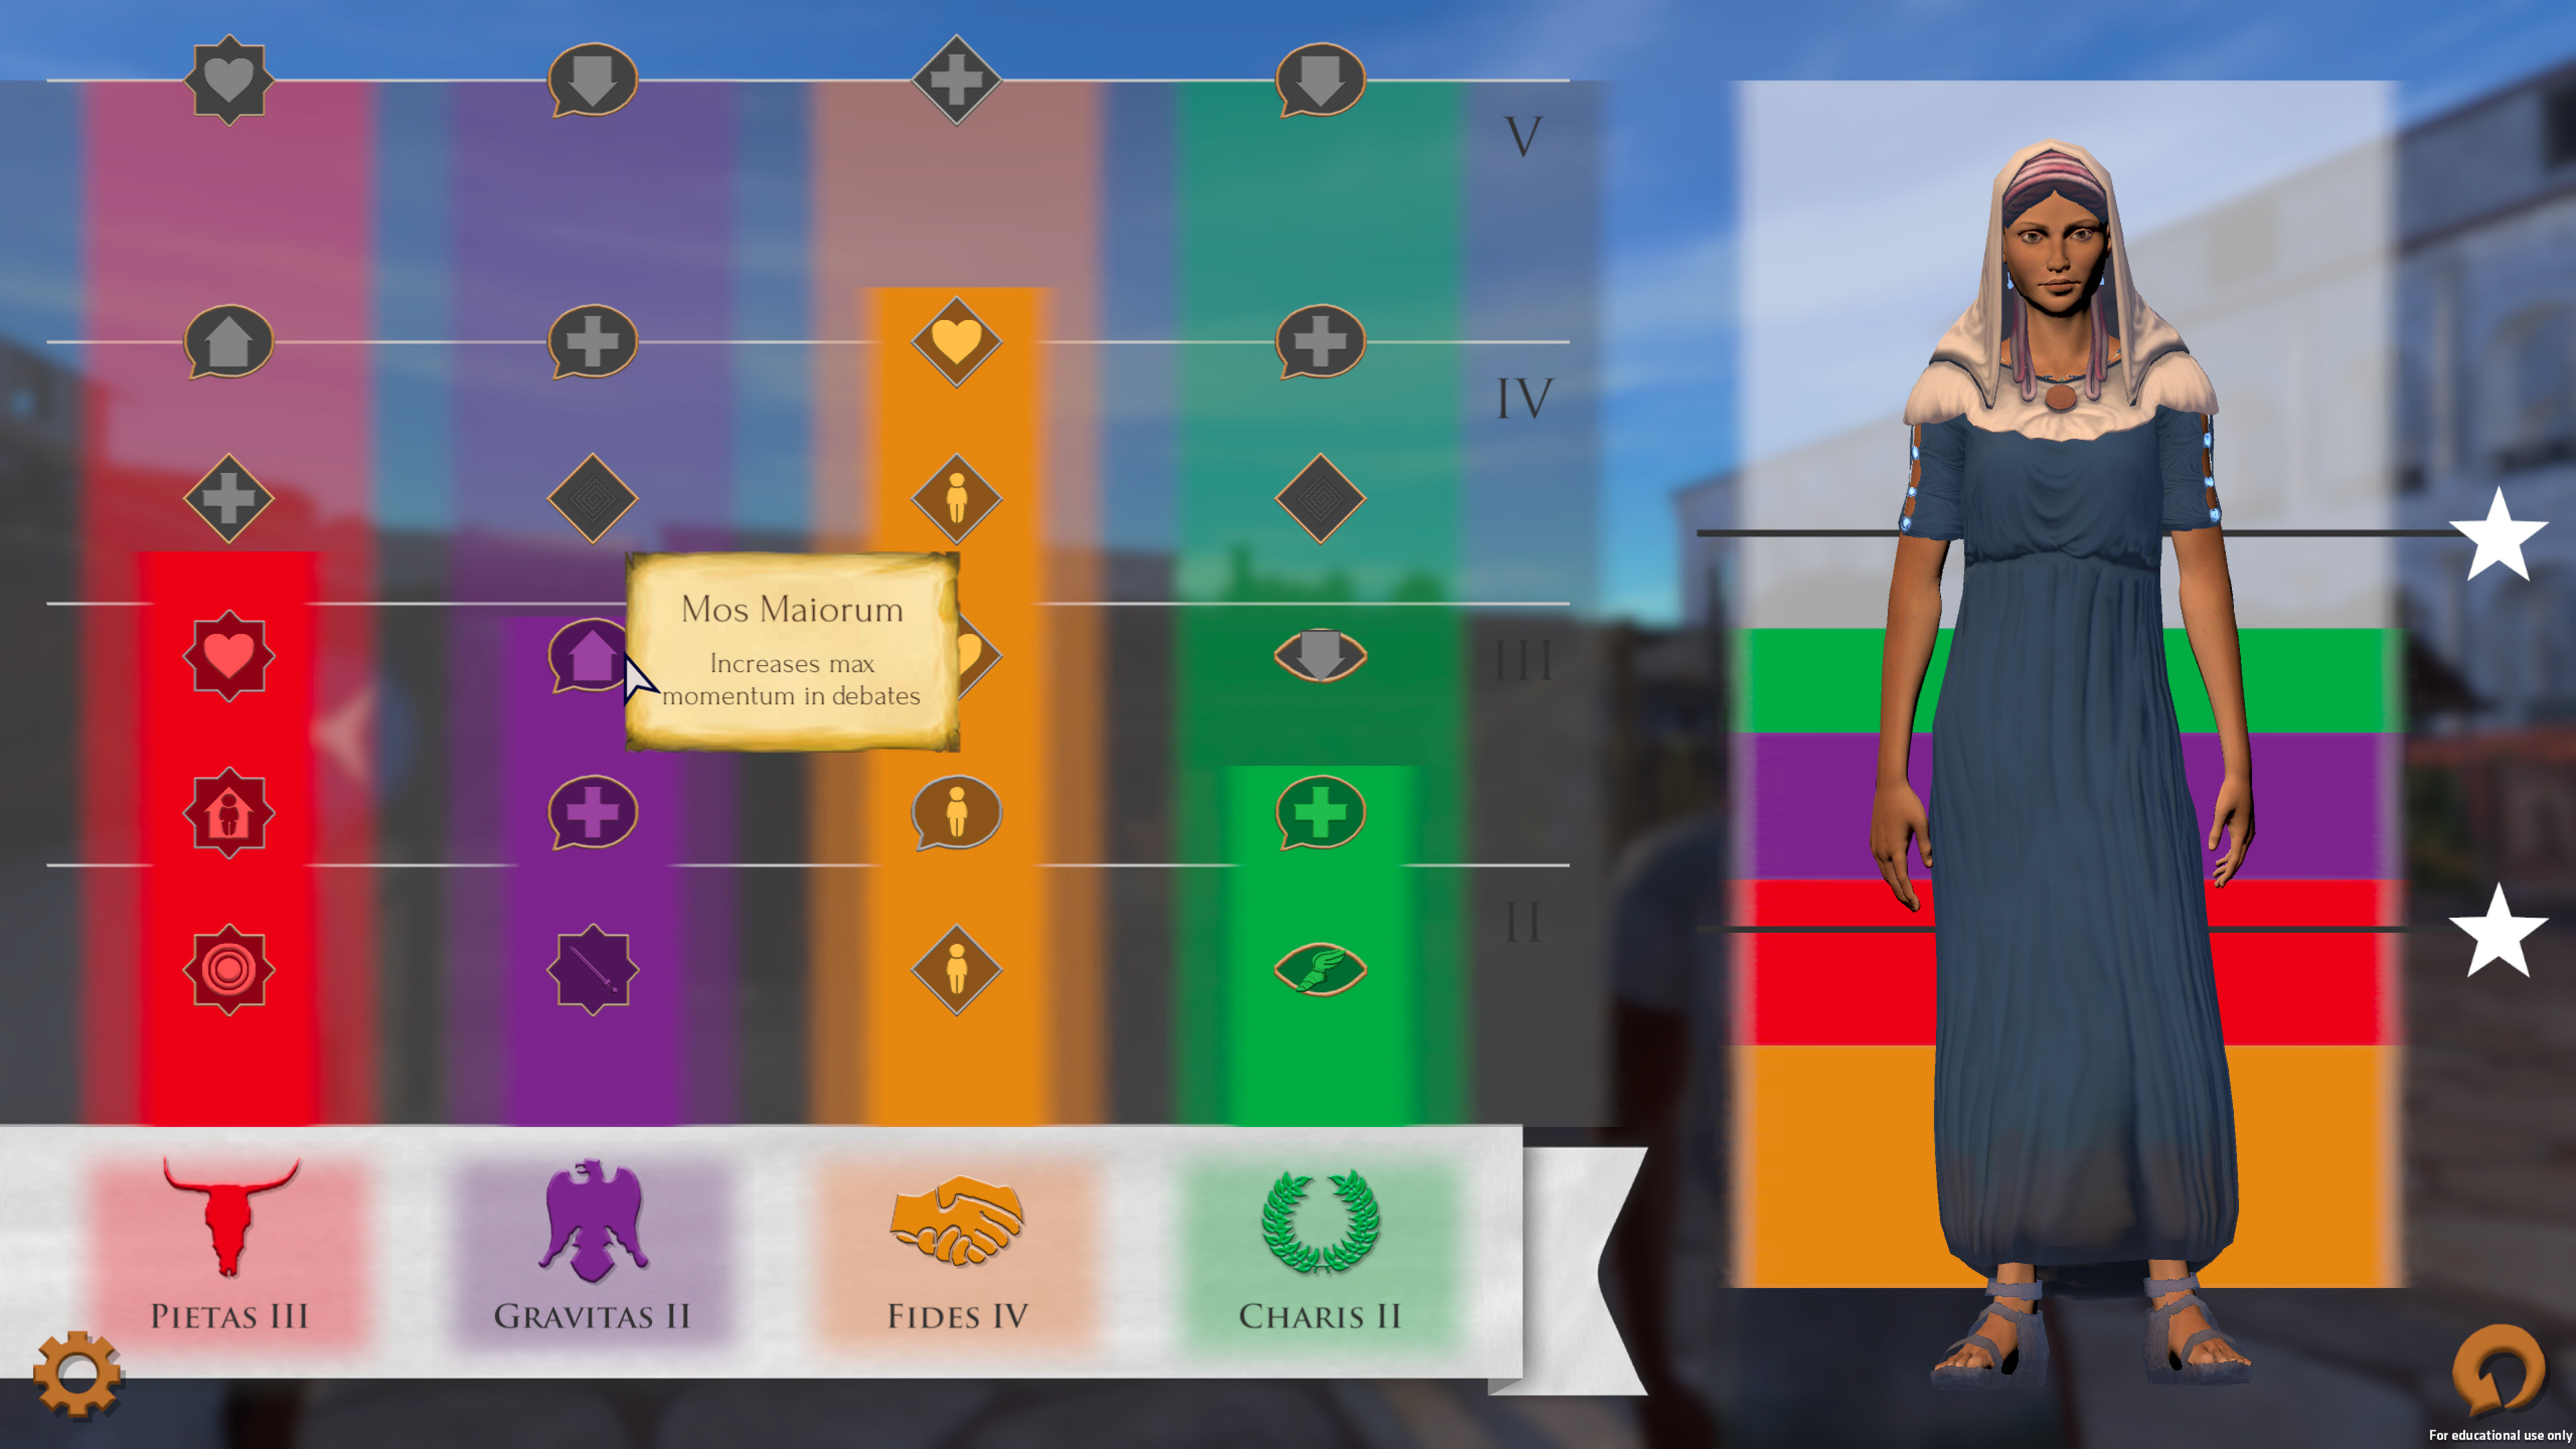 As the player progresses through the game, they gain experience in four different roman virtues, unlocking various talents. Combined, they show the player's overall progression and reflect the choices the player has made.